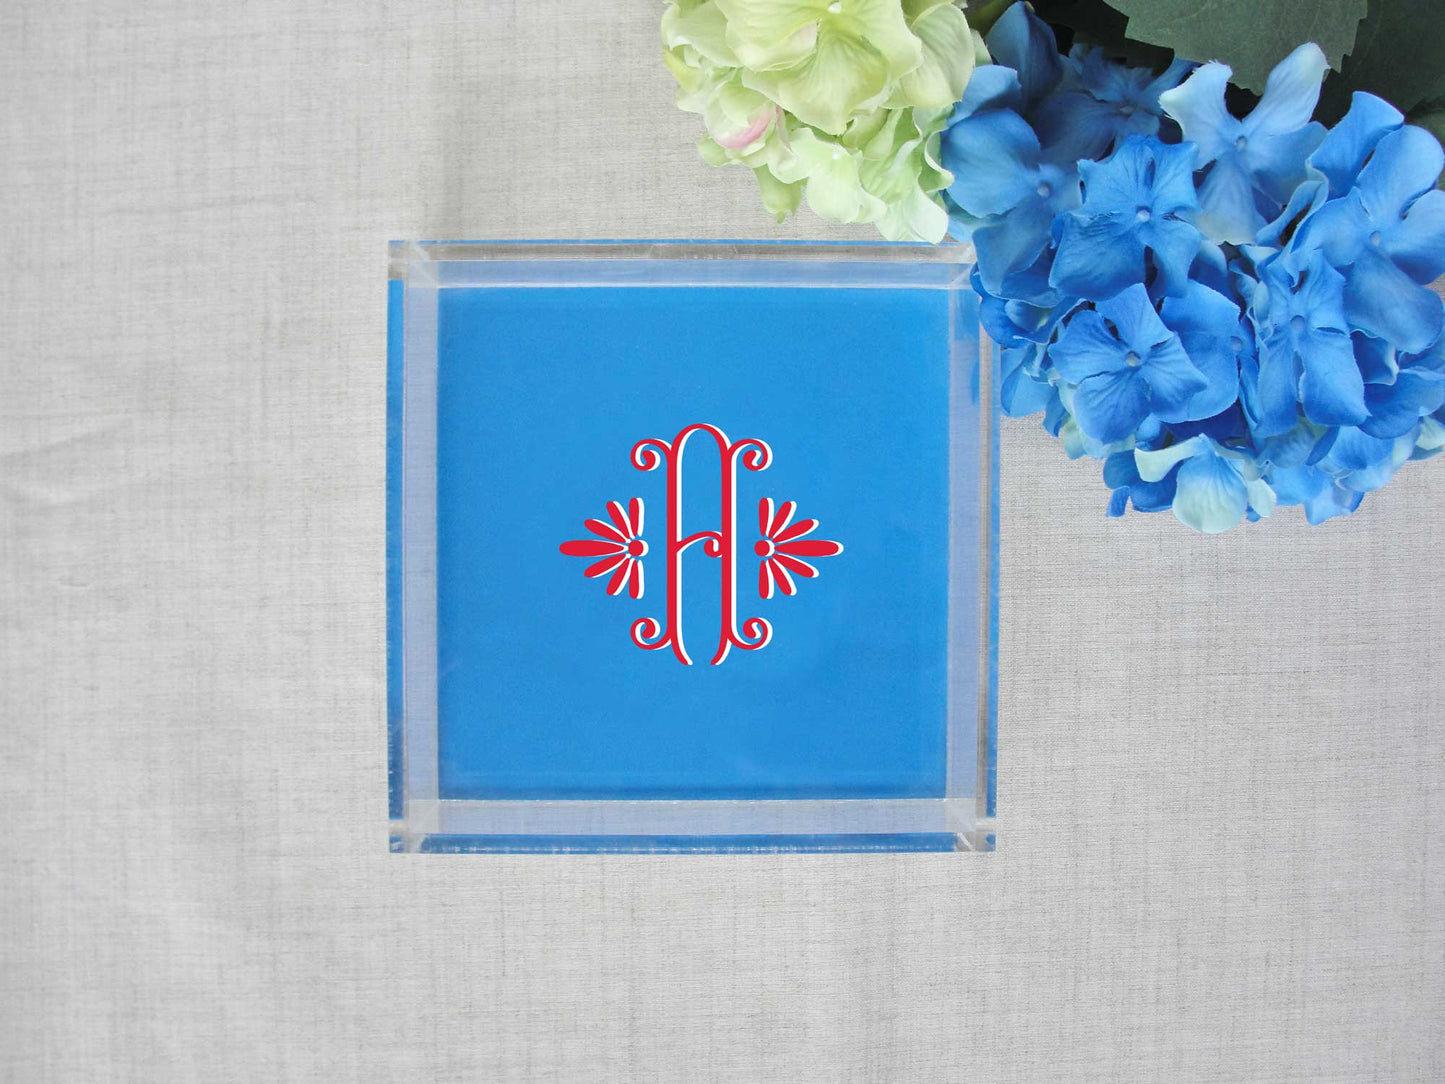 elegant single initial monogram, square lucite tray, small square acrylic tray, meredith collie paper, 6 inches square